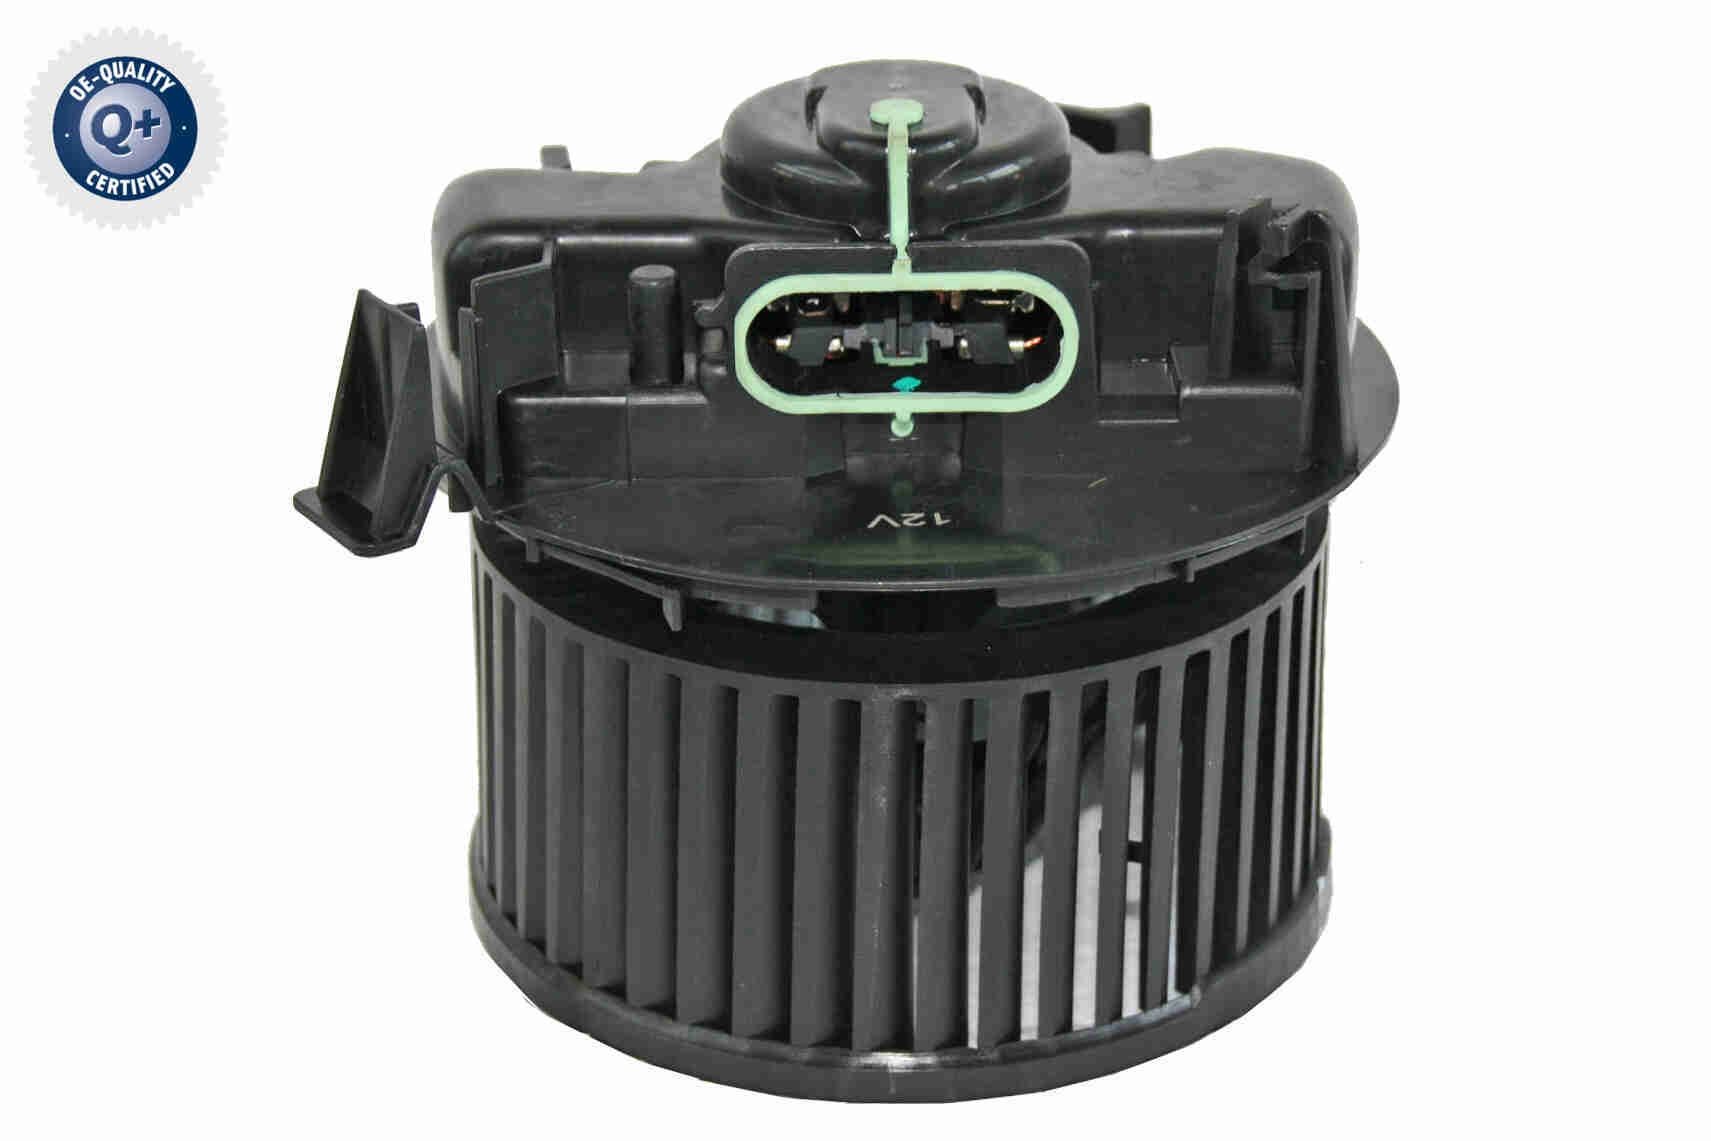 VEMO Q+, original equipment manufacturer quality, for vehicles with automatic climate control Blower motor V46-03-1390 buy